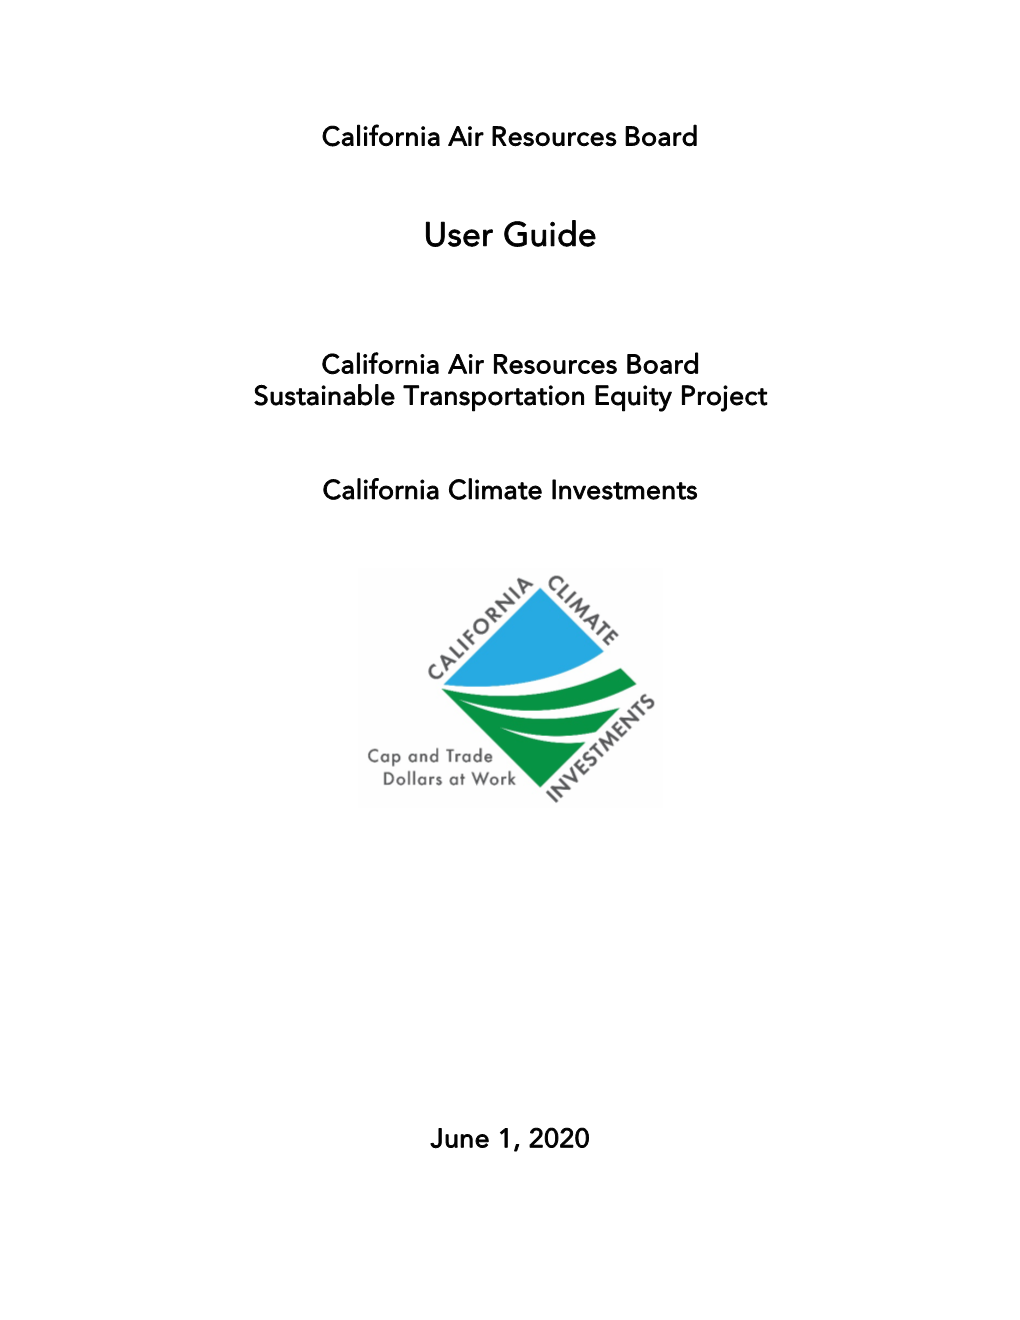 Sustainable Transportation Equity Project User Guide